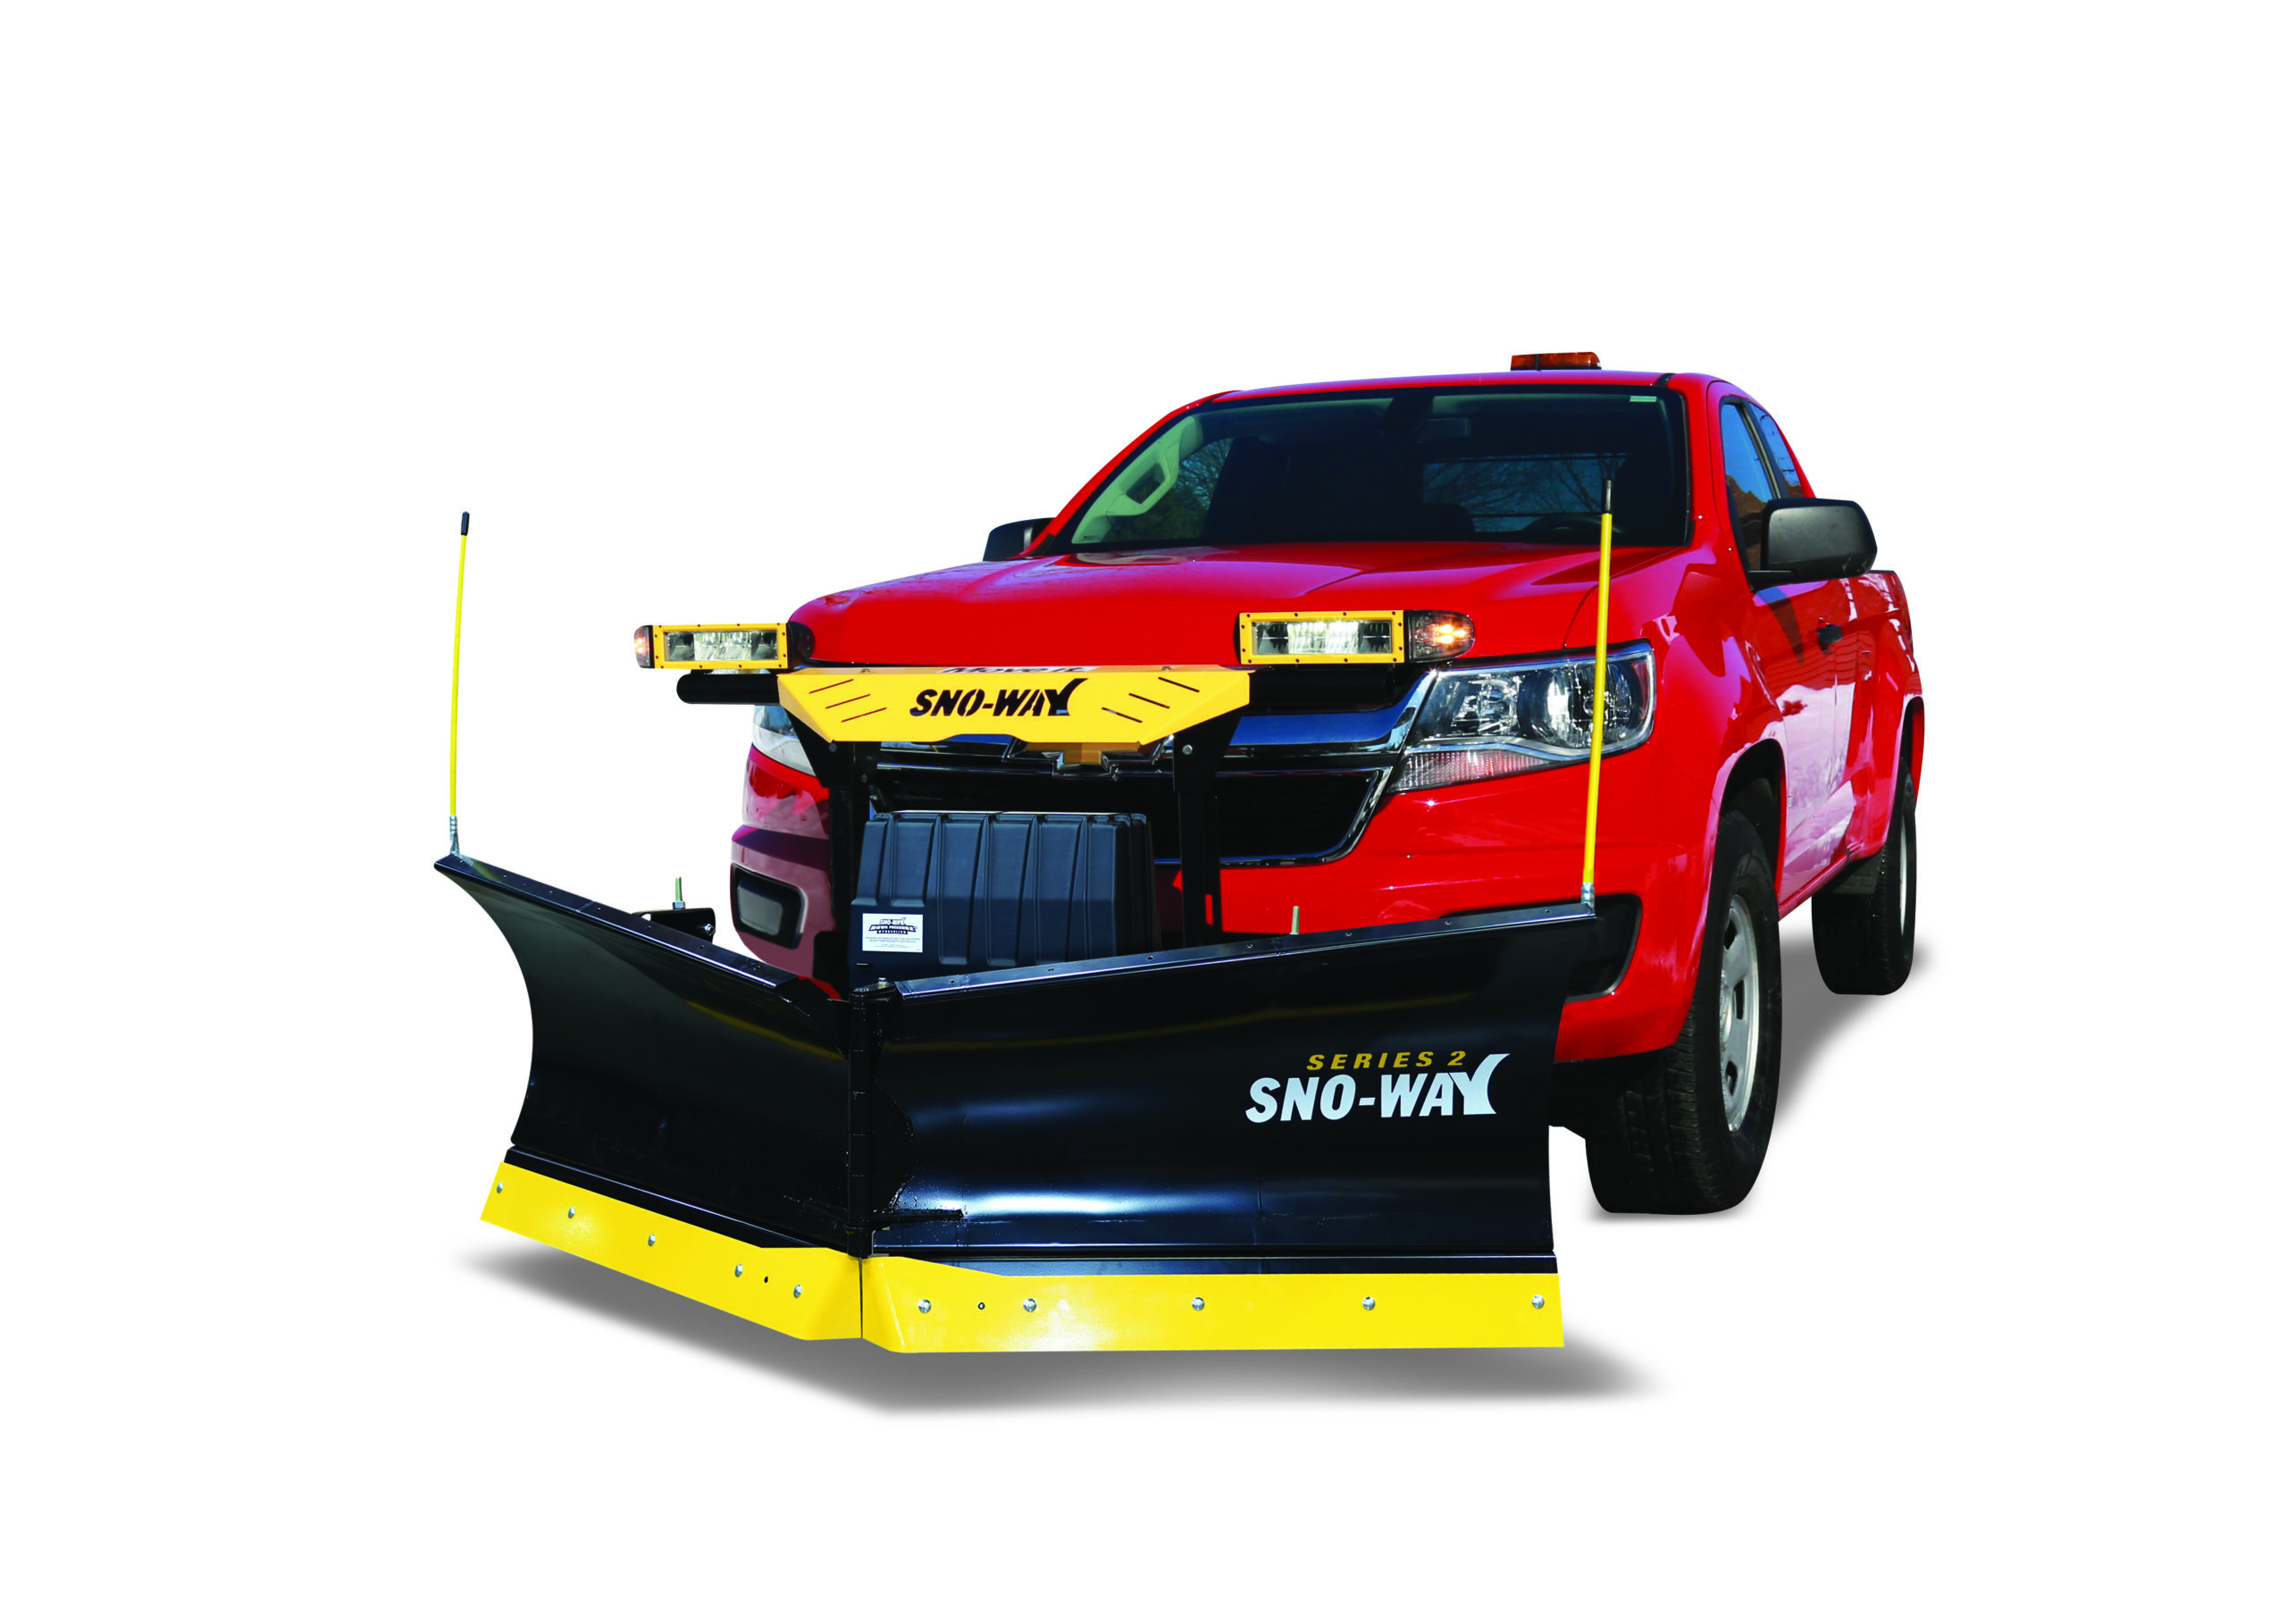 22V Snow Plow On a Red Truck